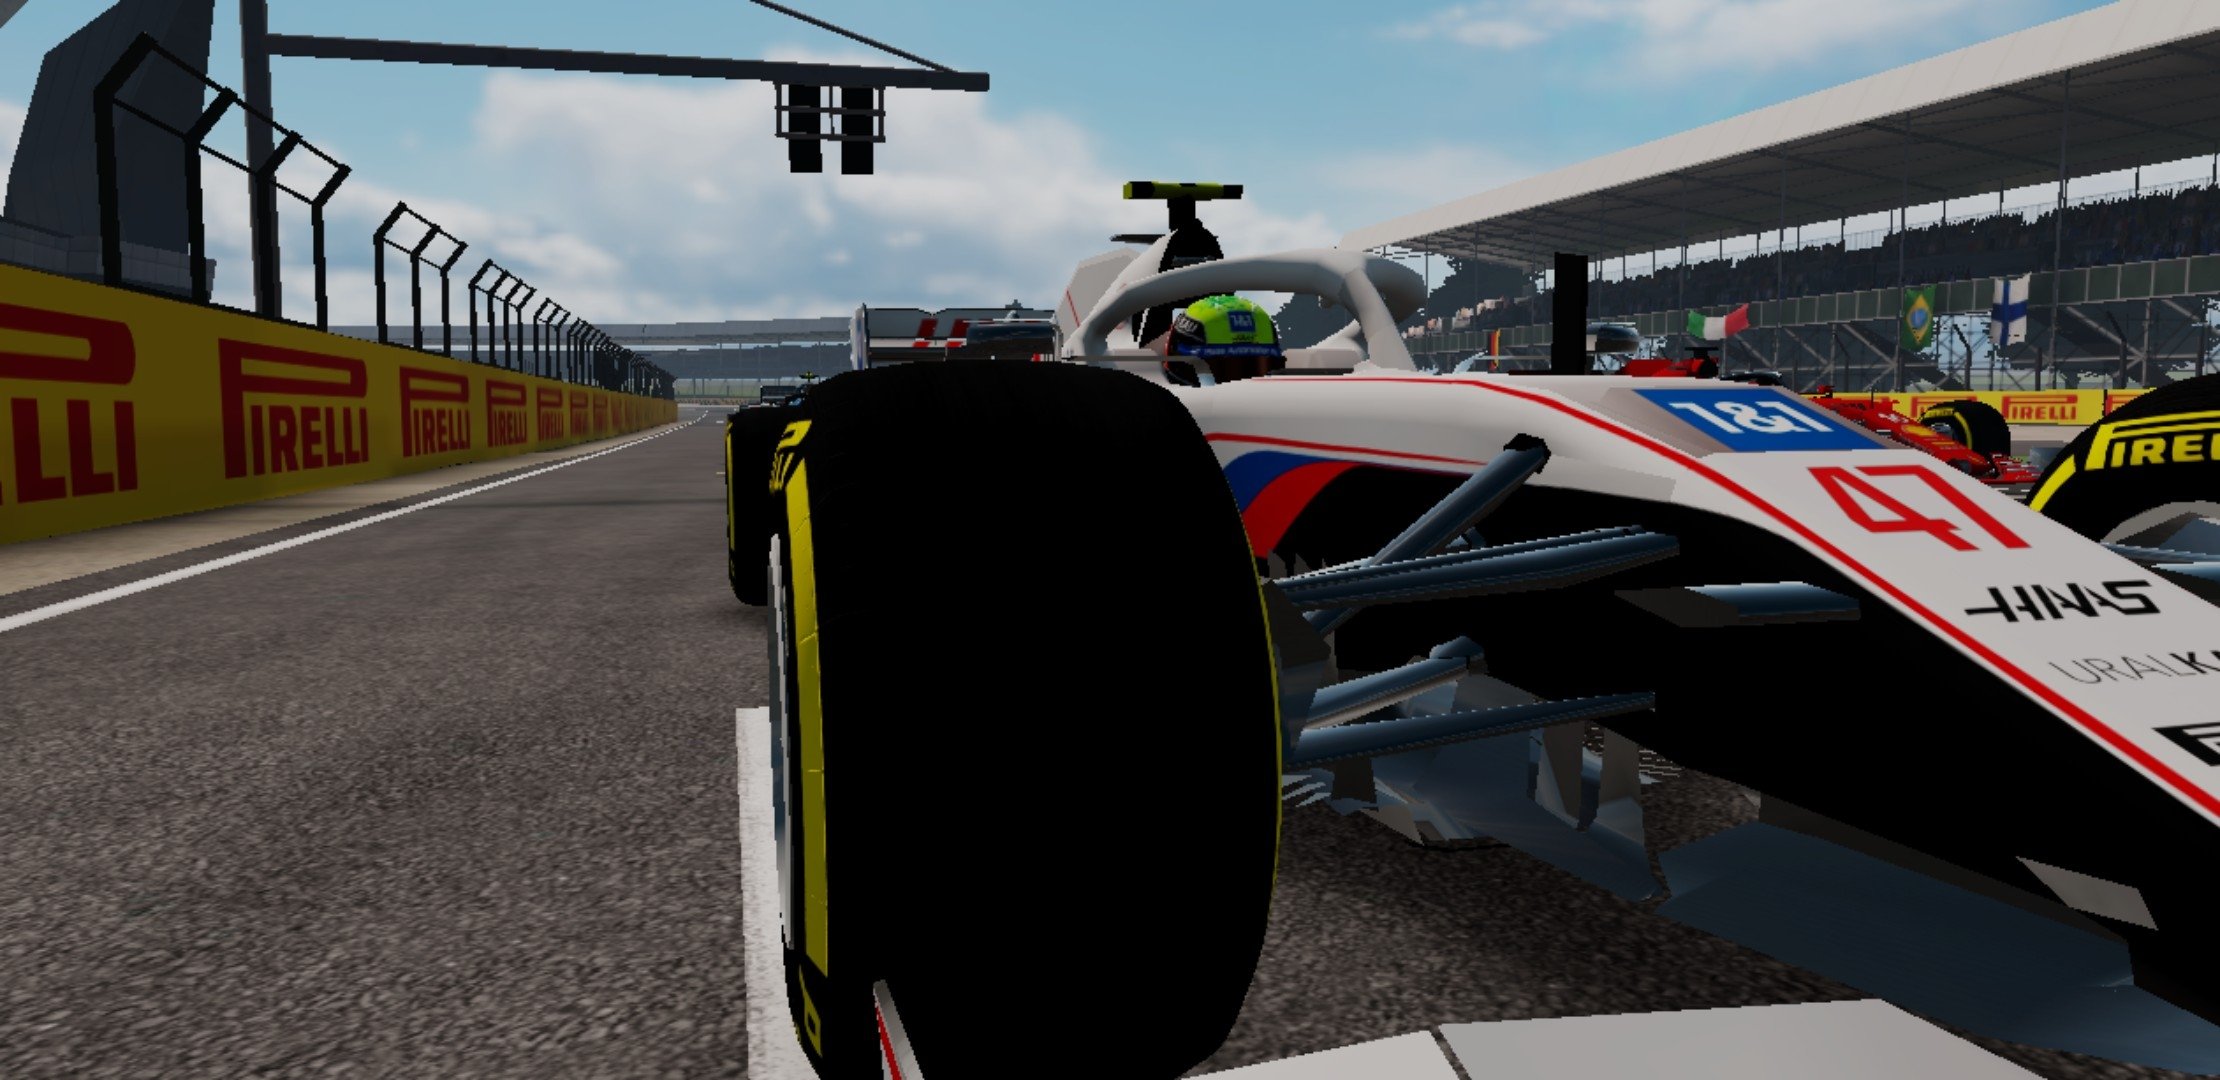 F1 Mobile Racing APK download - F1 Mobile Racing for Android Free